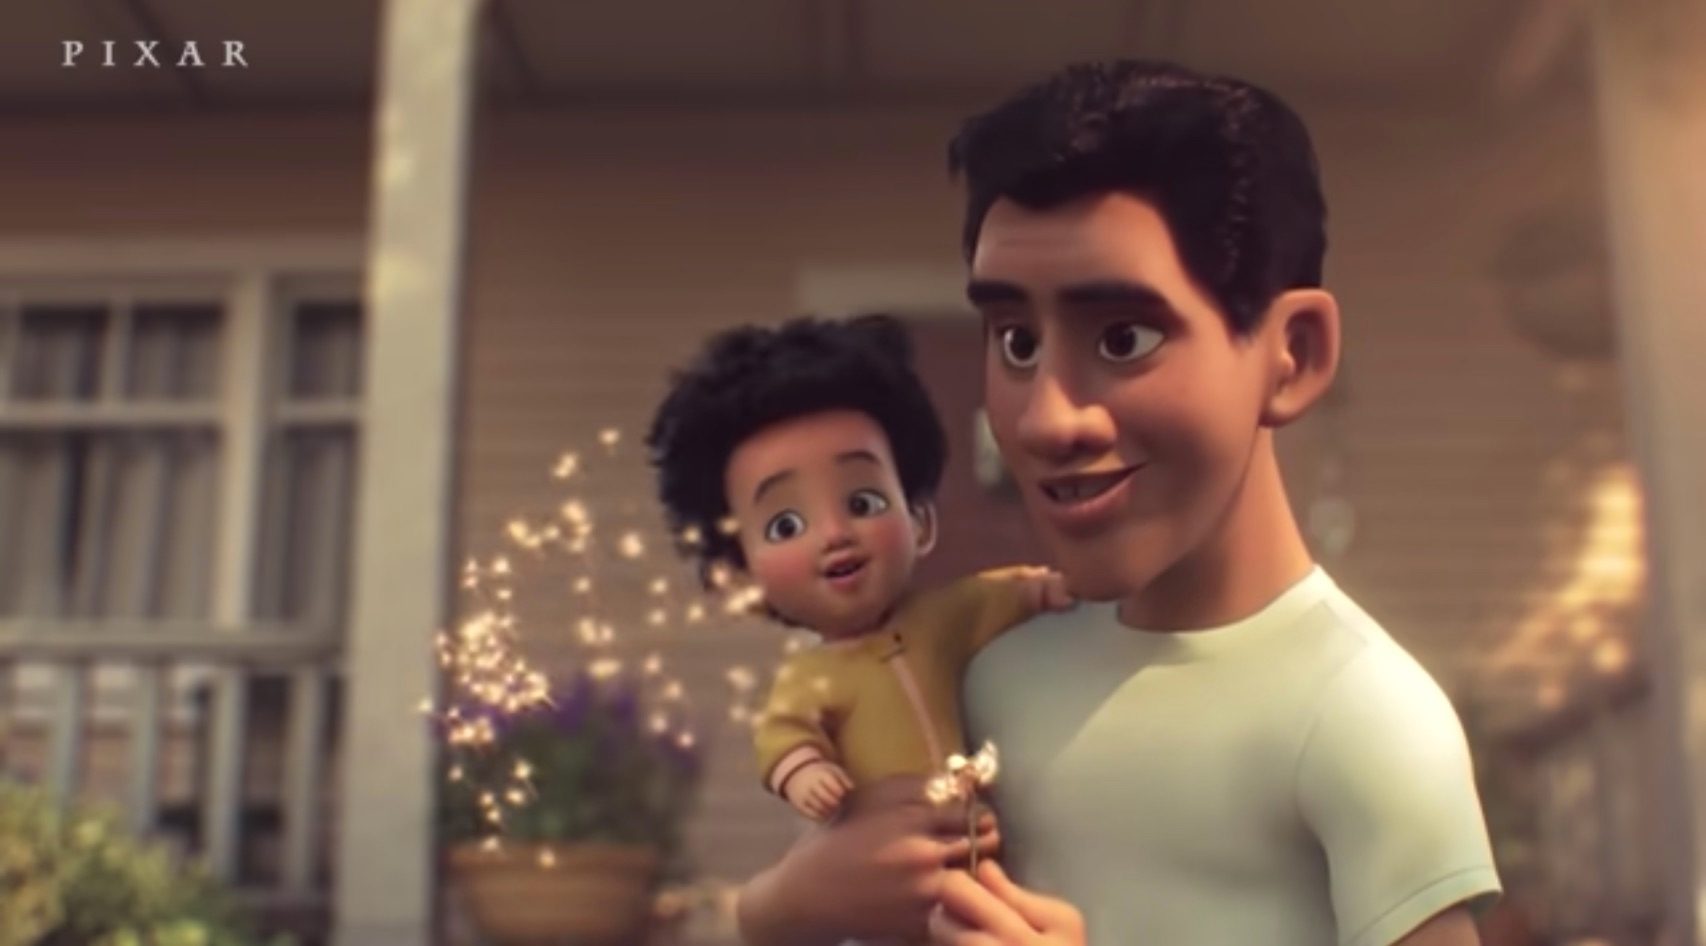 WATCH: 'Float,' Pixar's first short film featuring Filipino characters, is  now available on YouTube - RAPPLER